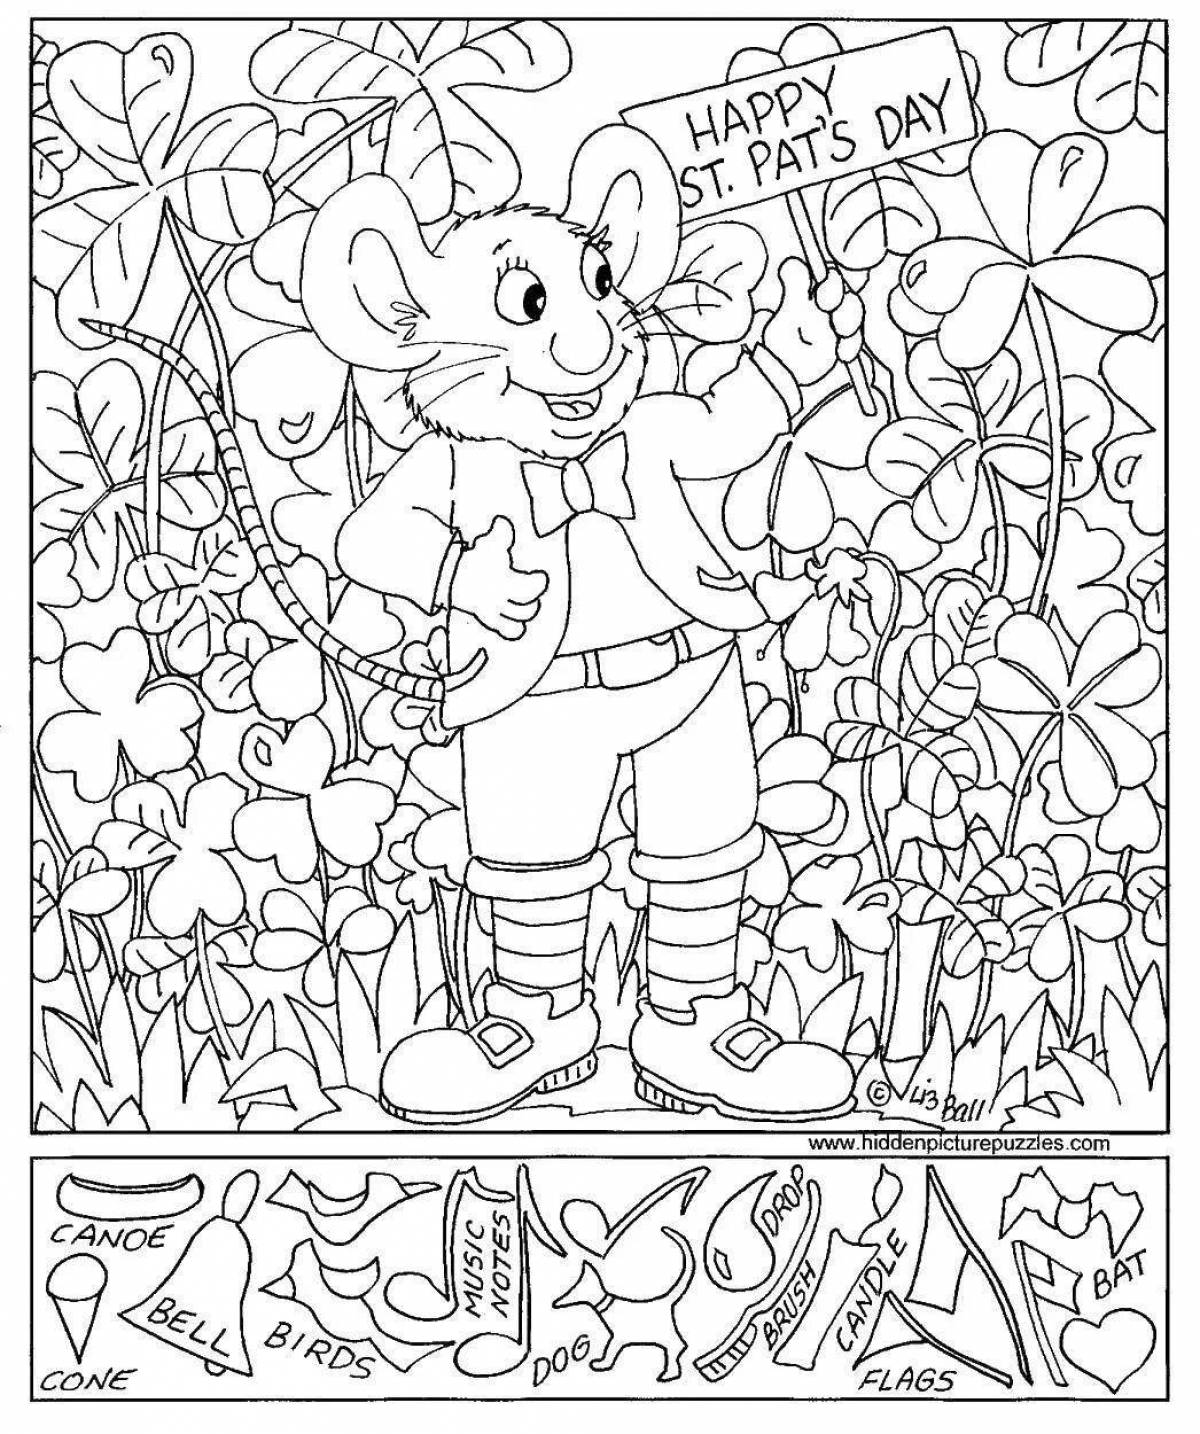 Find the object fun coloring book